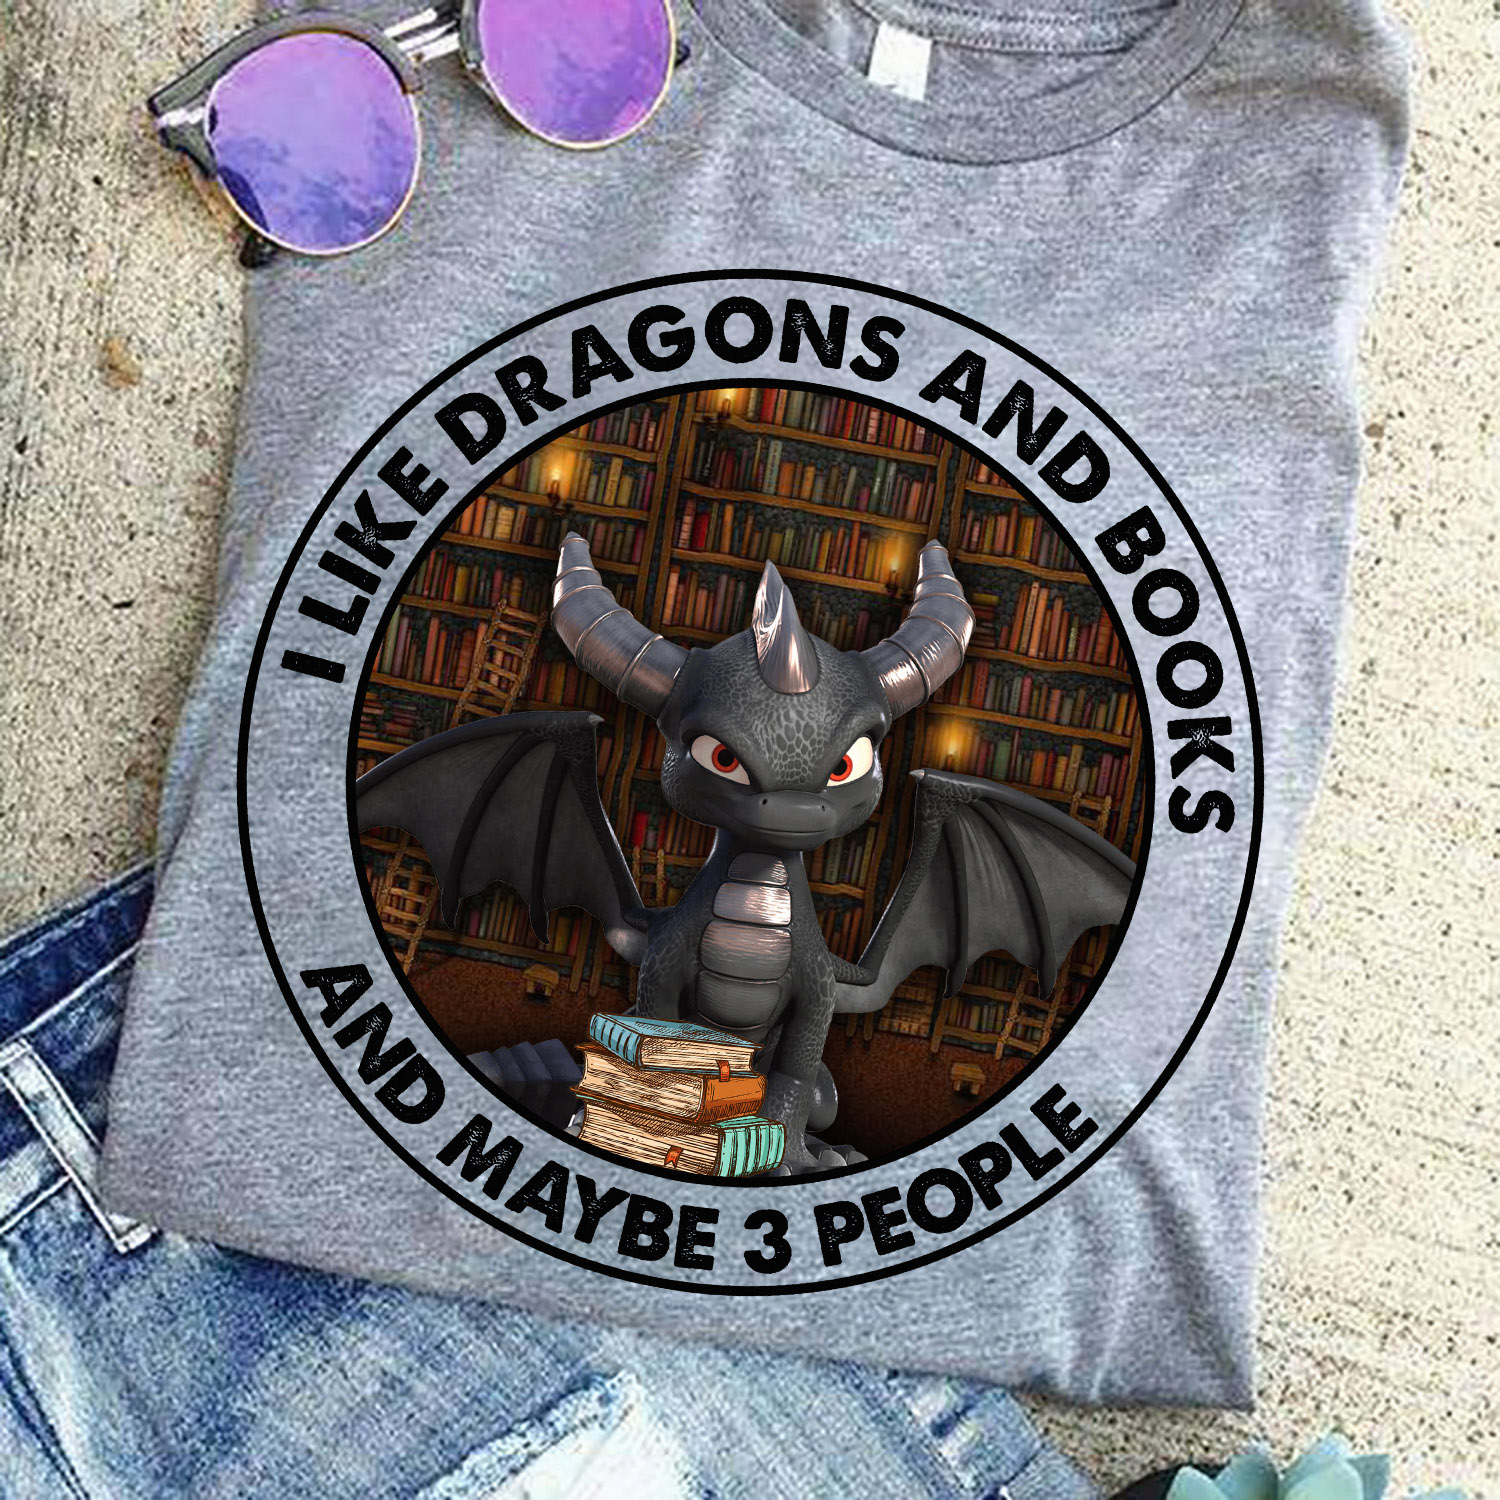 I like dragons and books and maybe 3 people - Night furry dragon